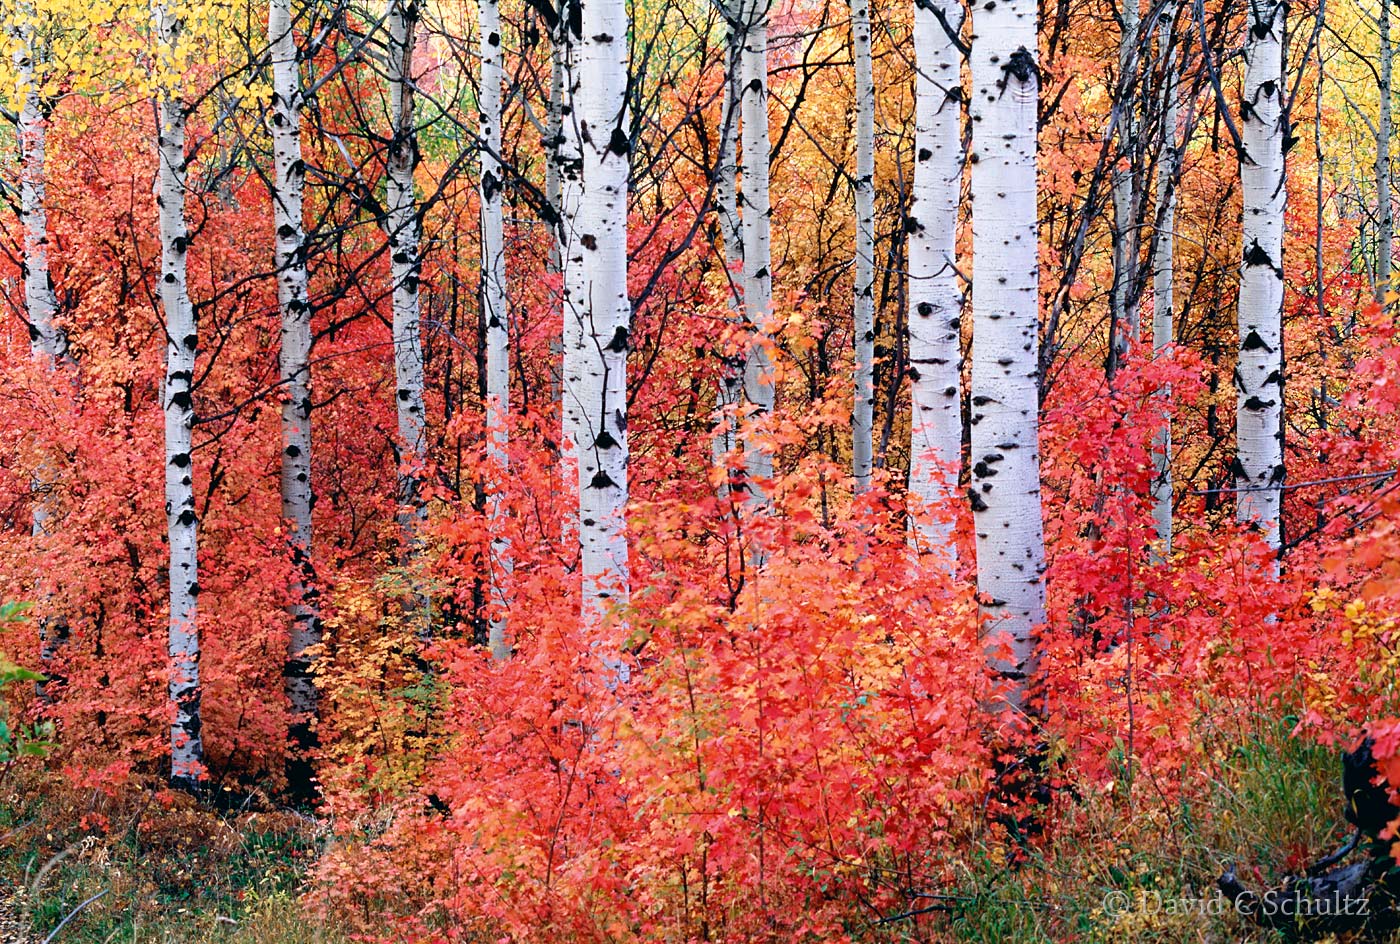 Fall colors in the Wasatch Mountains, Utah - Image #3-906